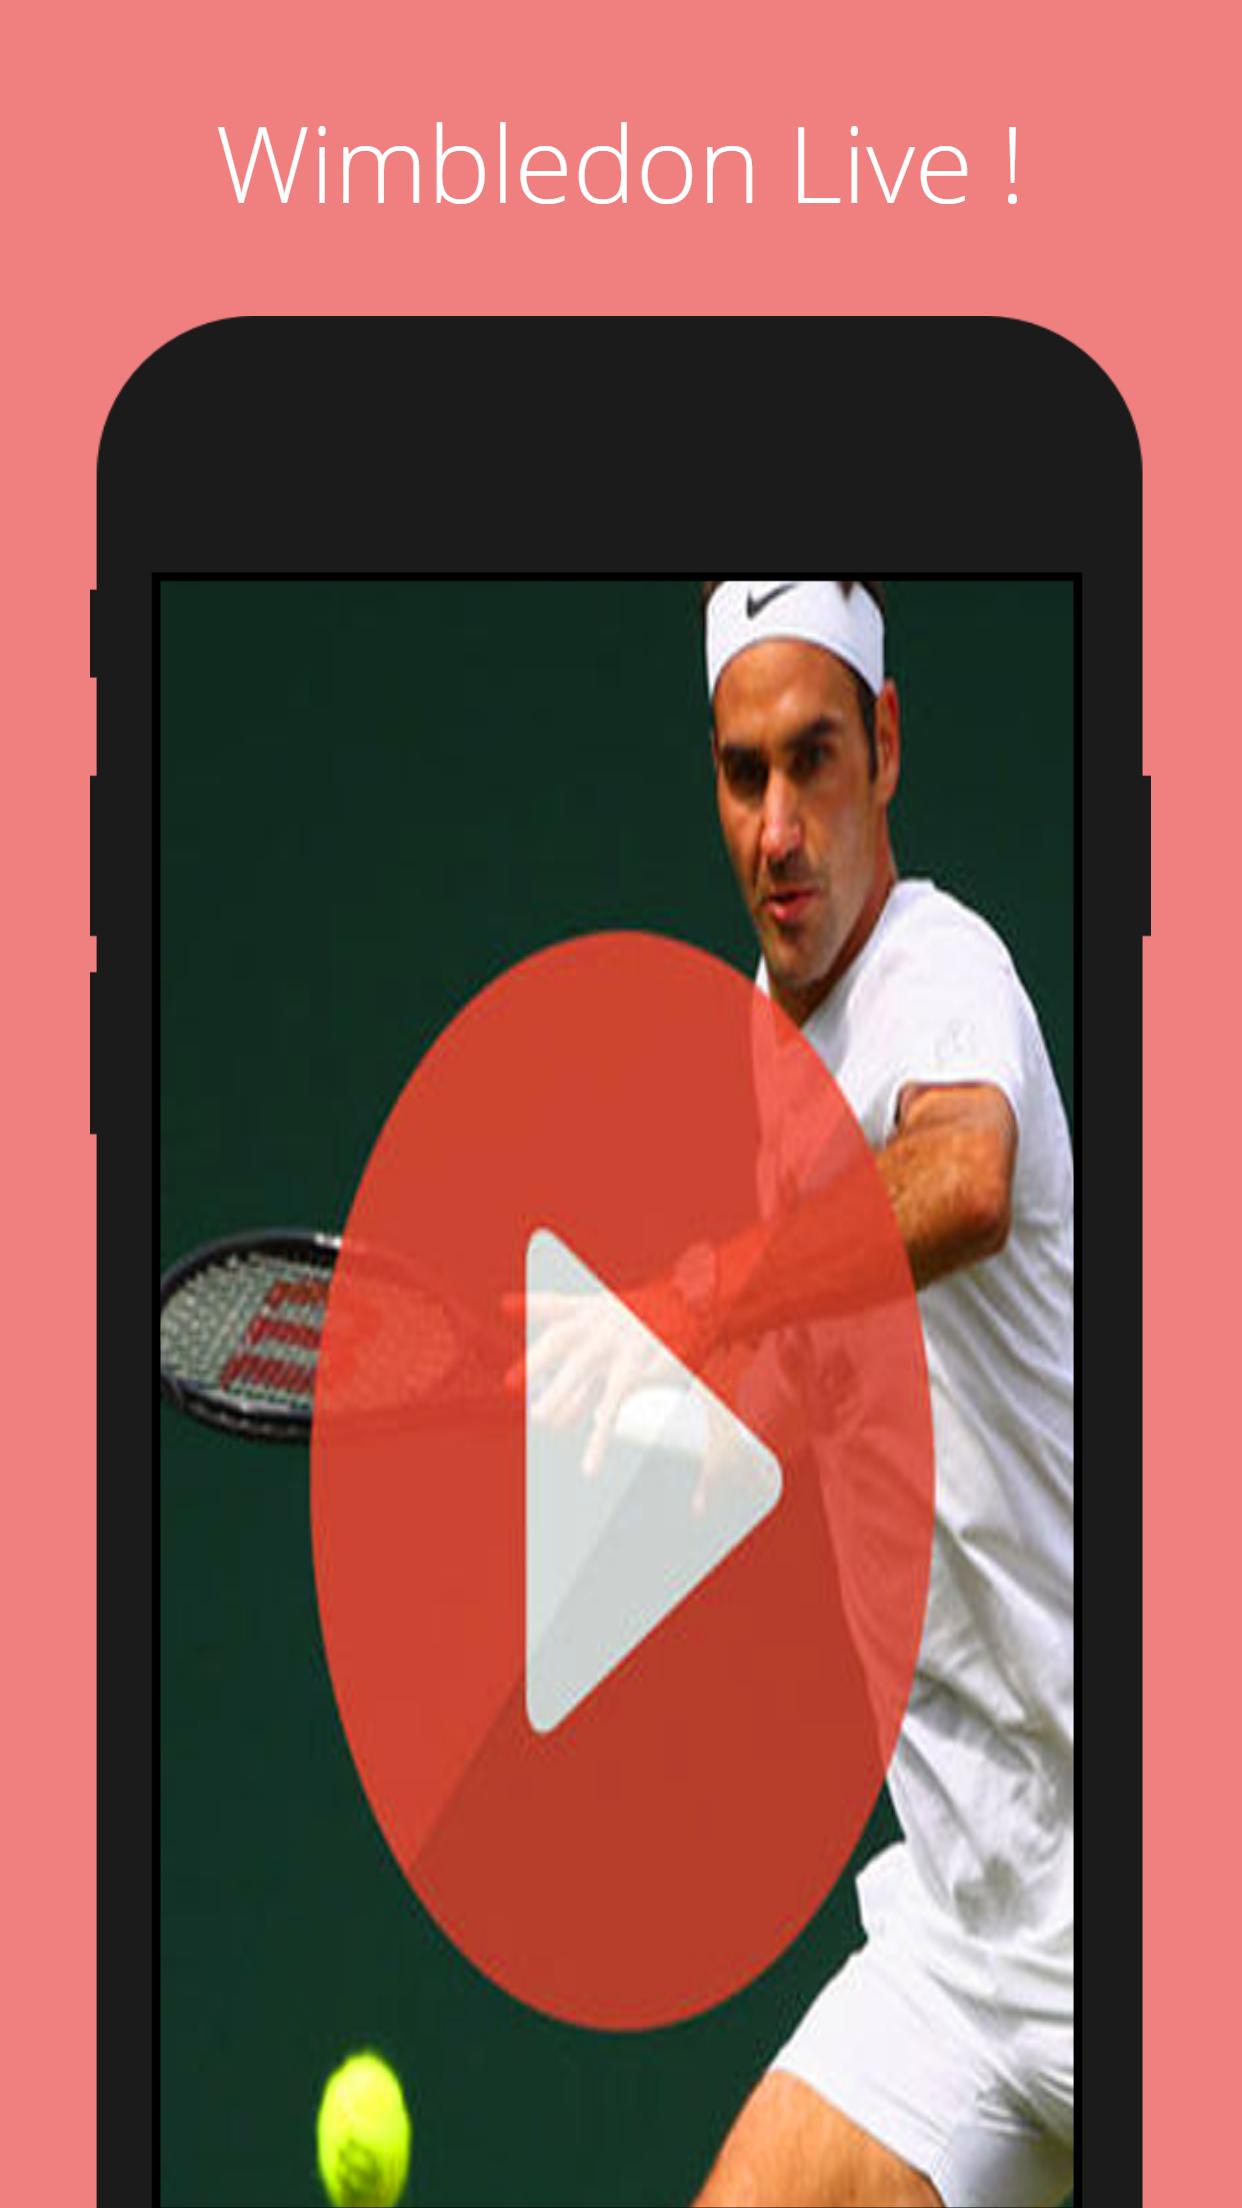 Wimbledon live streaming for Android - APK Download